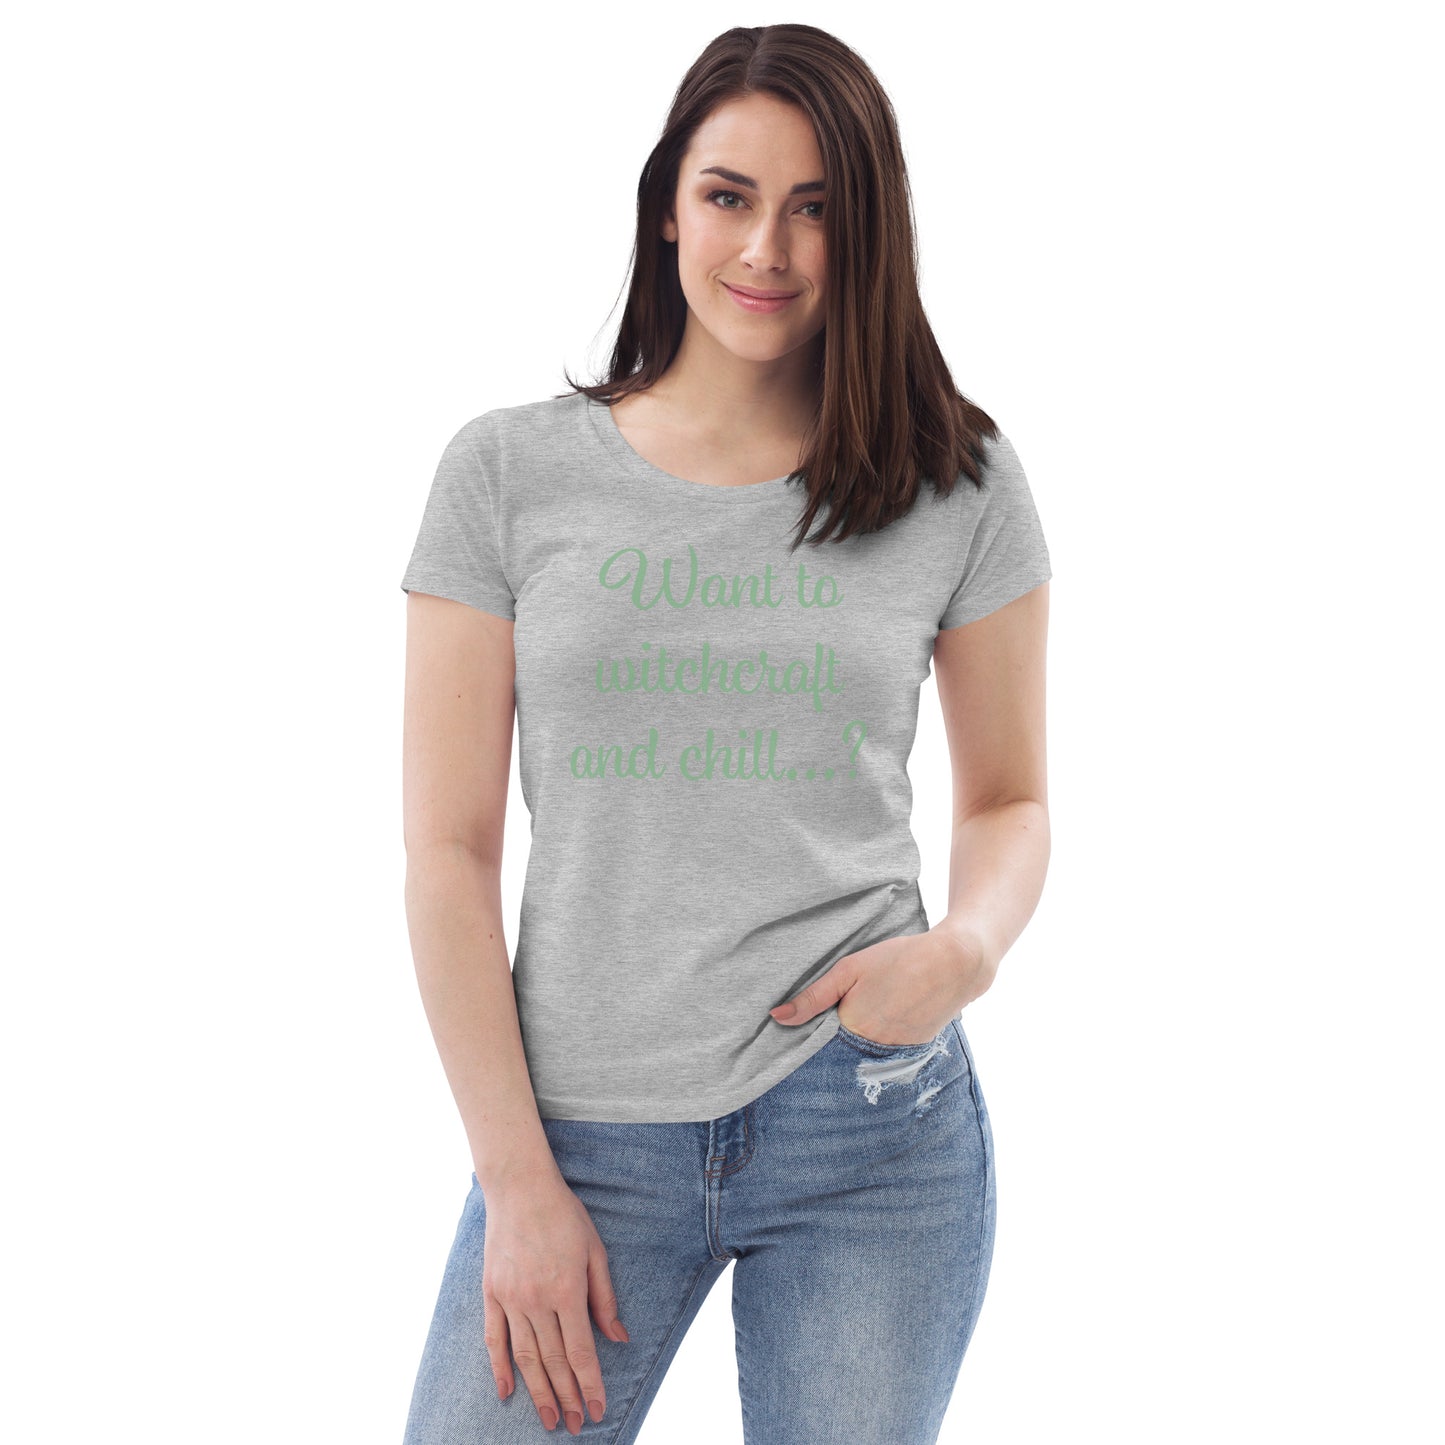 Want to witchcraft and chill, t-shirt